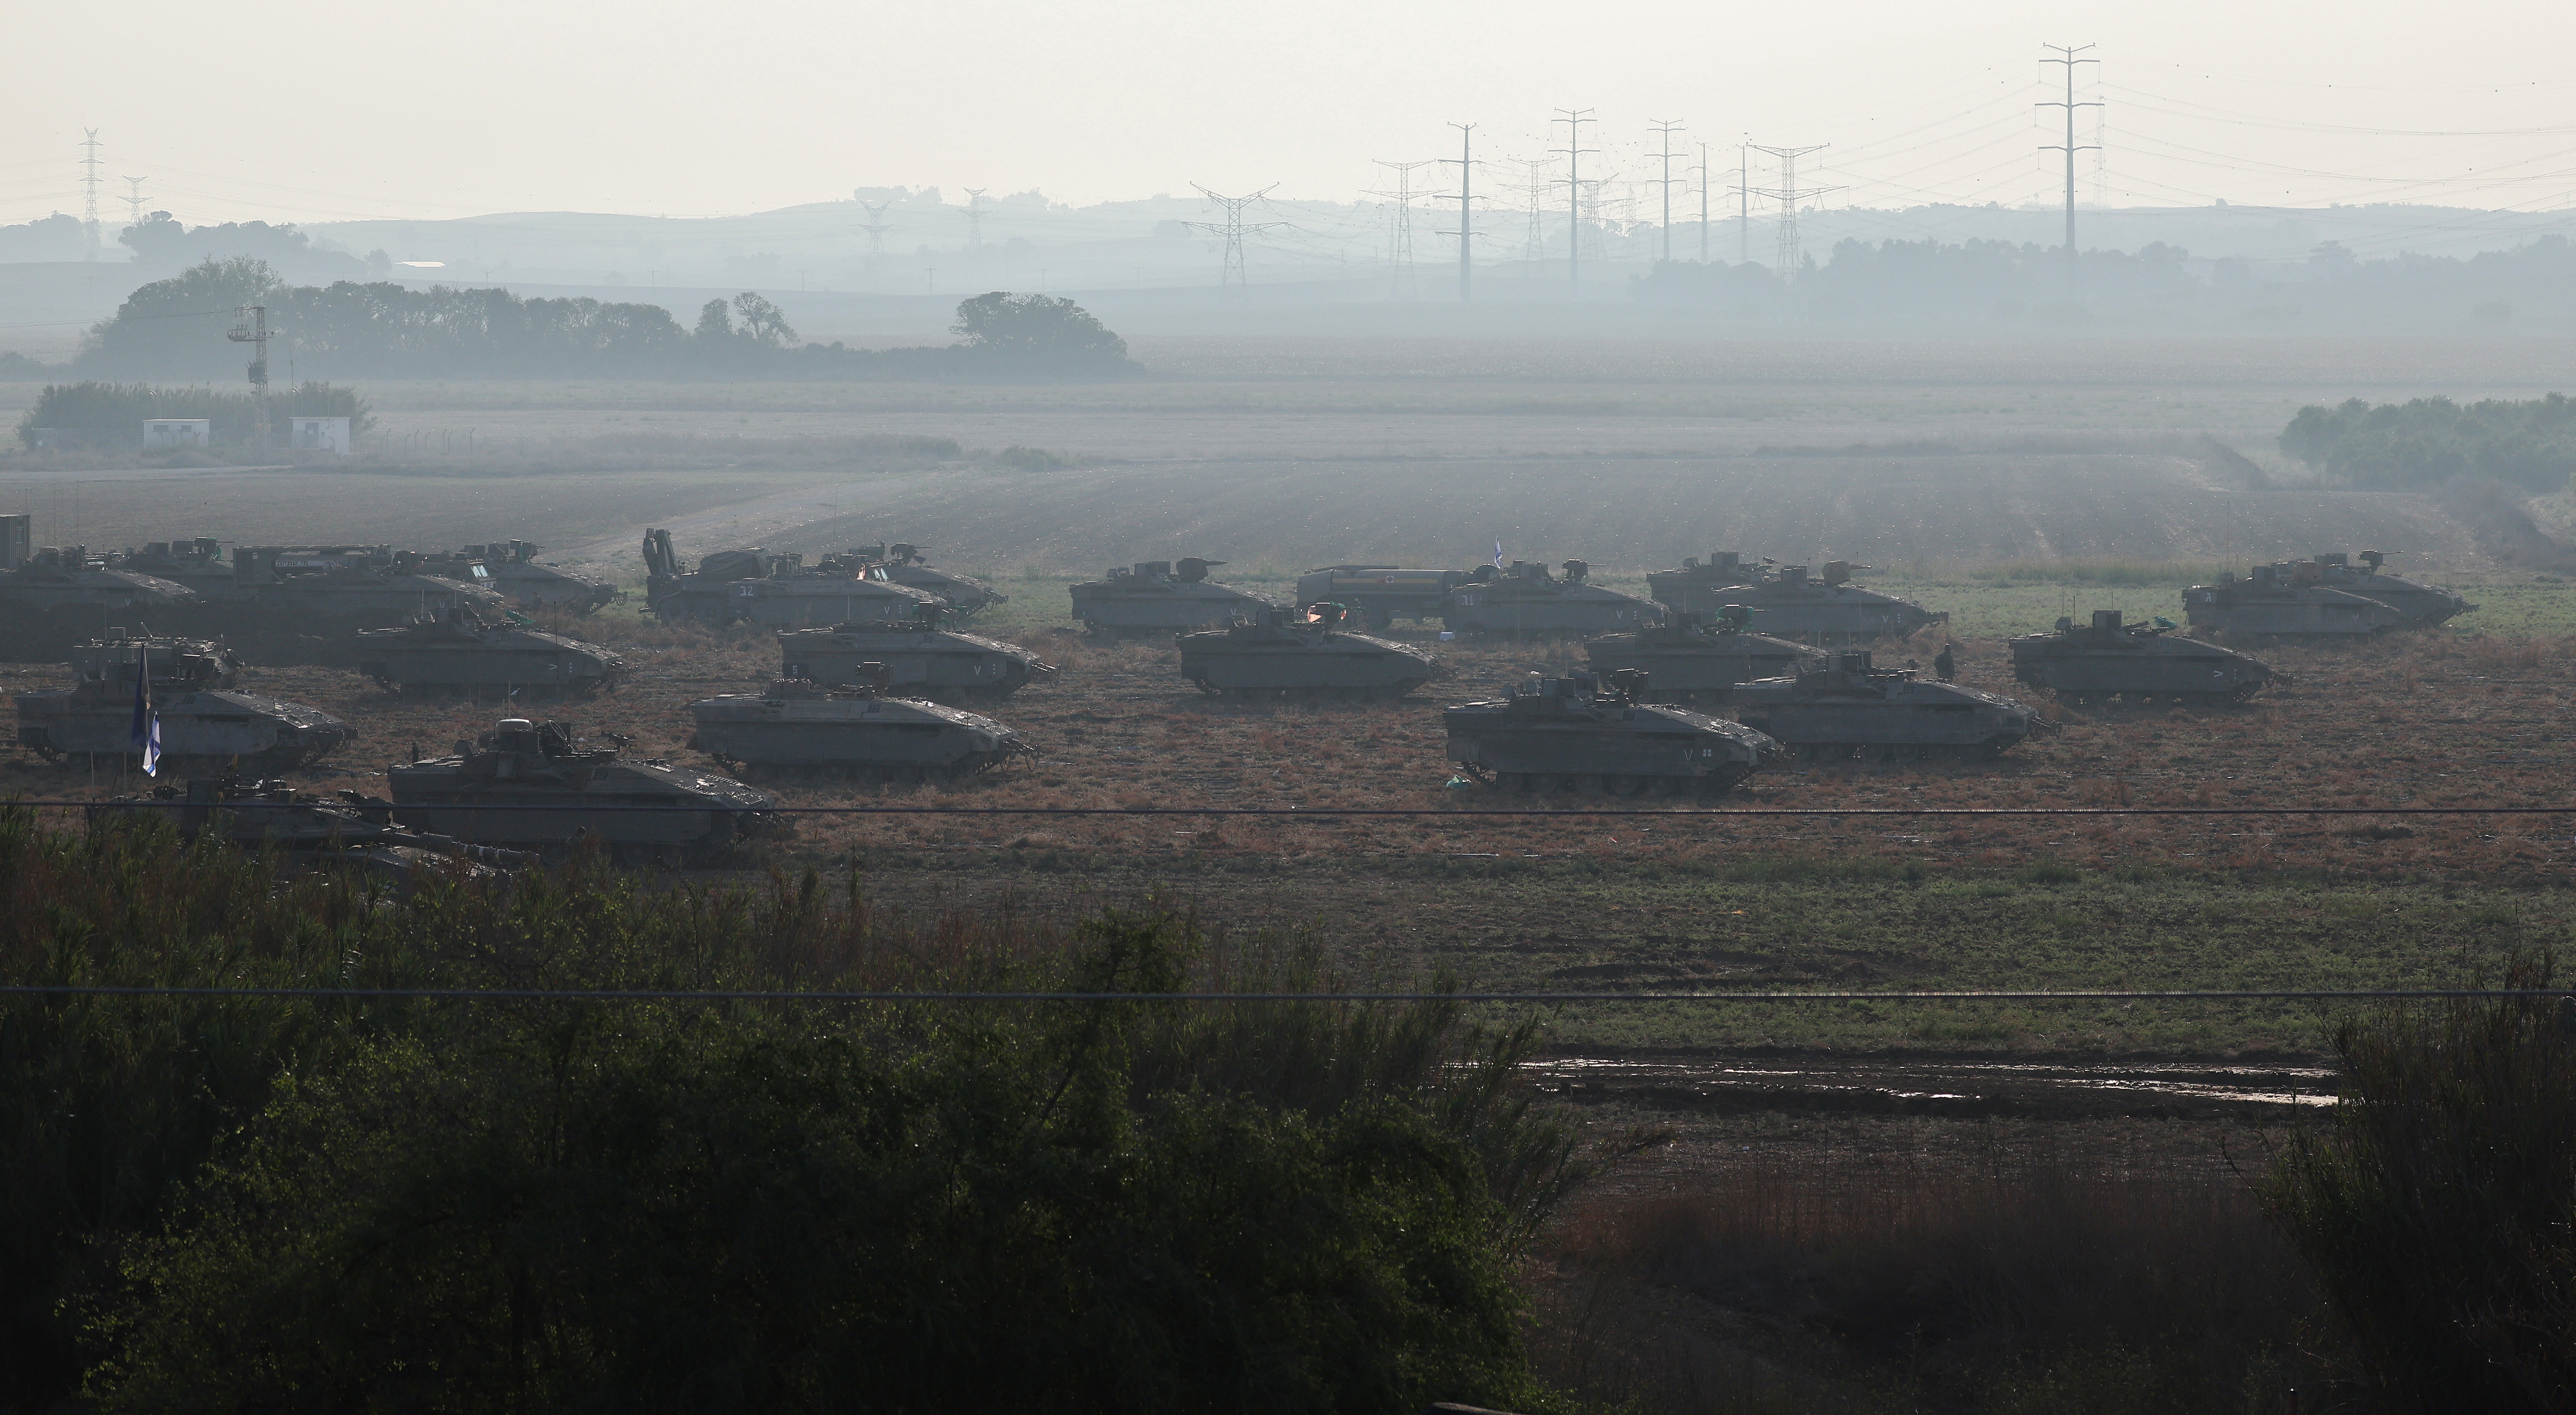 Israeli tanks and military vehicles take position near Israel's border with the Gaza Strip